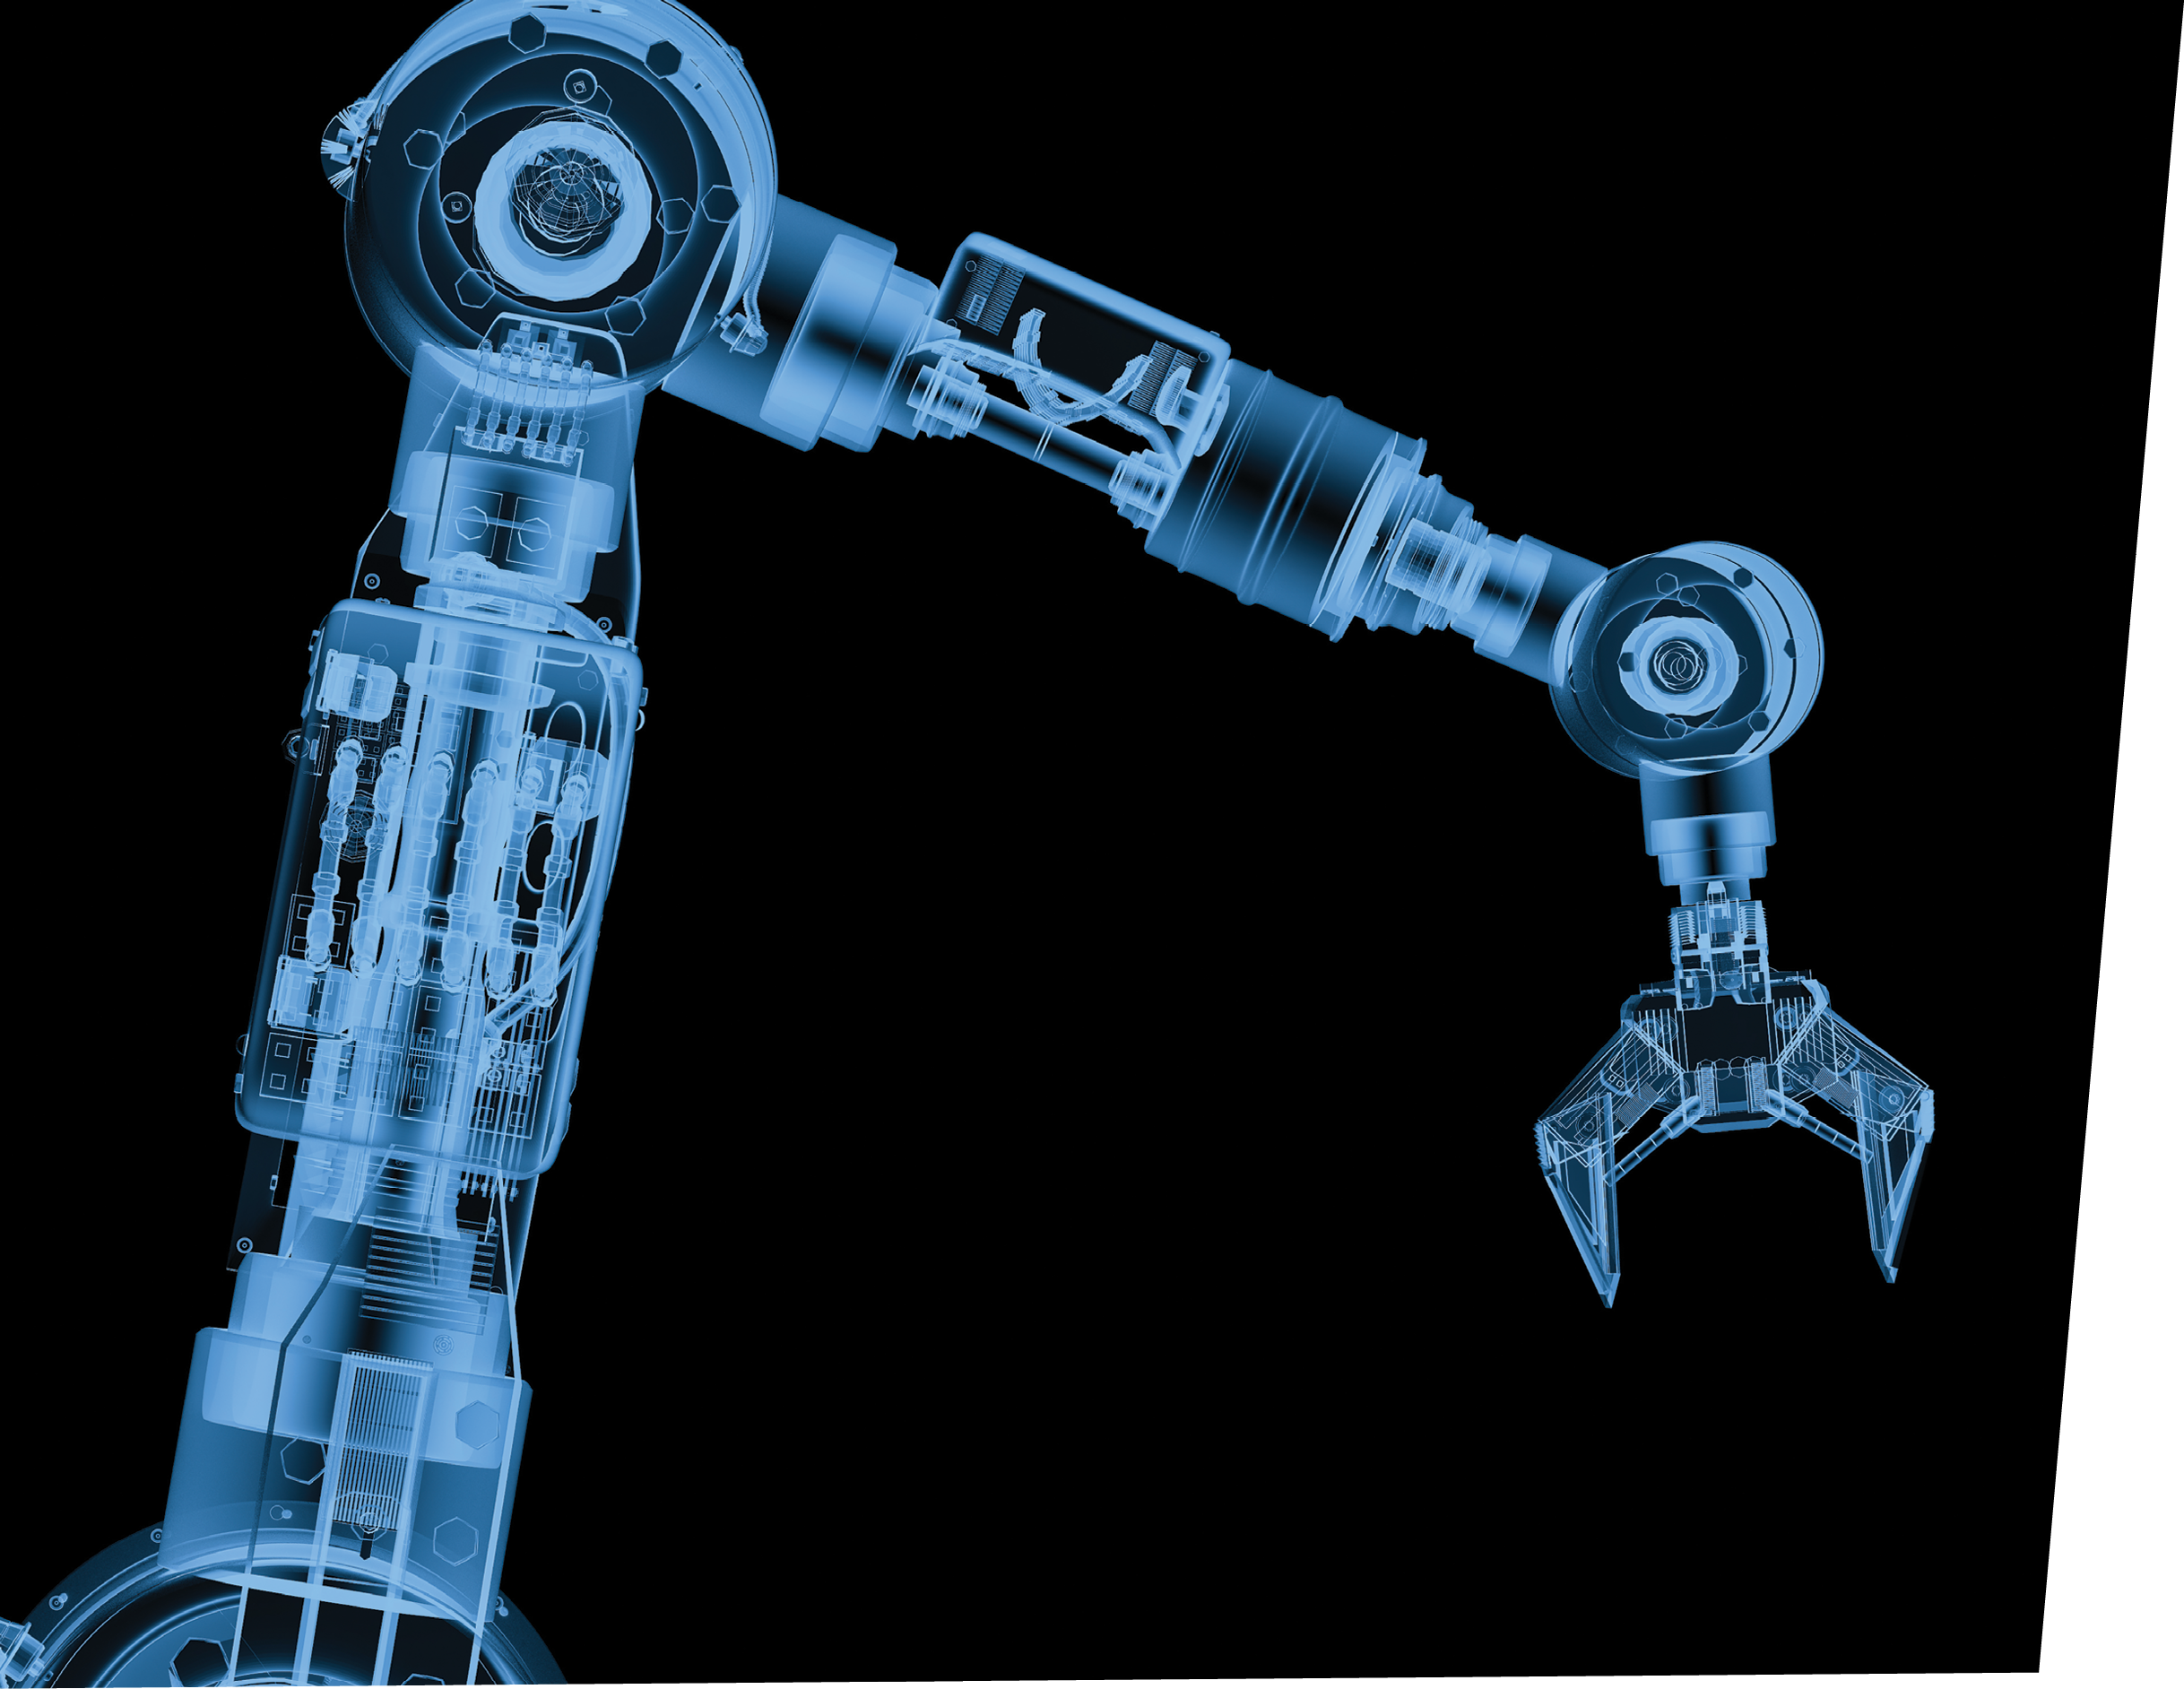 Developing a mixed safety-critical robotic